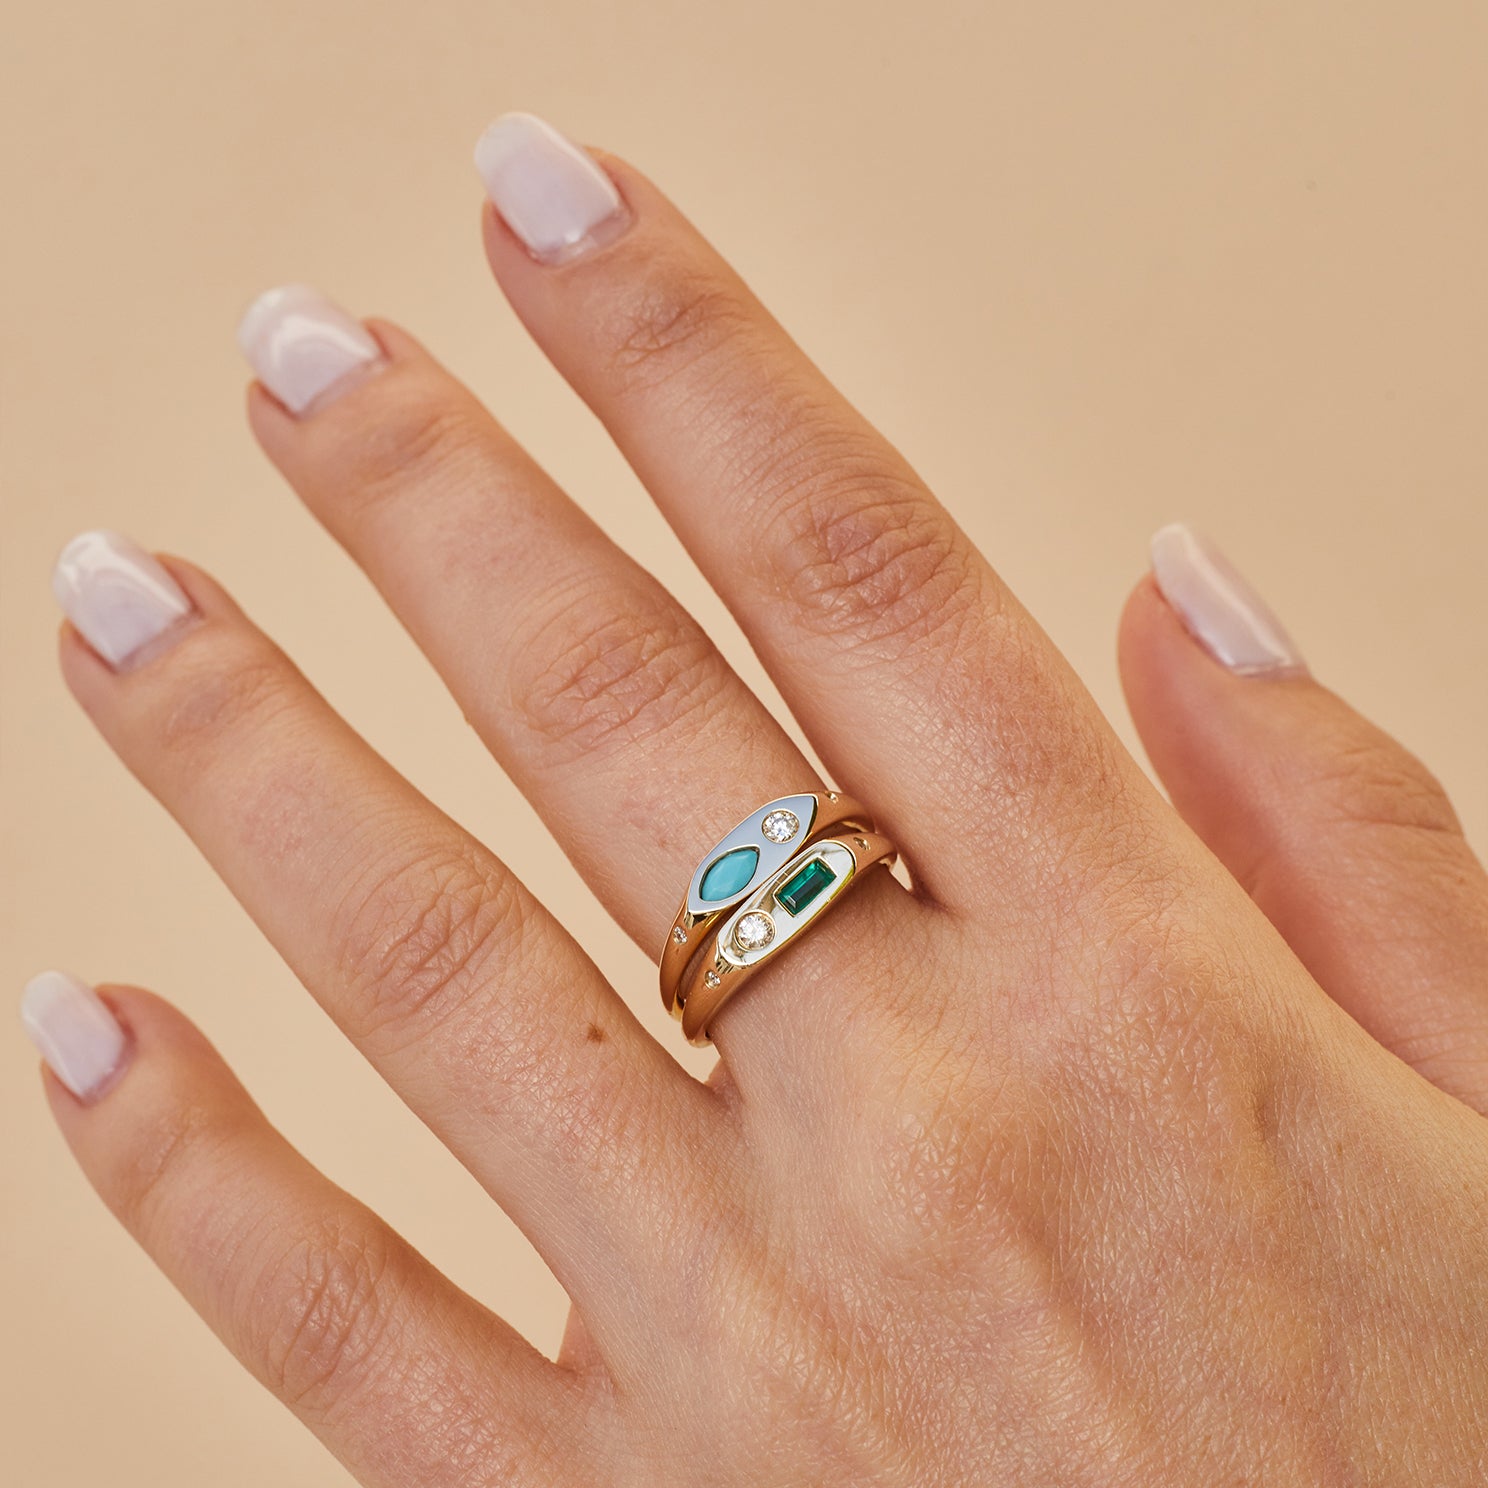 The Seaside Treasure Gift Set in 14k yellow gold styled on middle finger of model